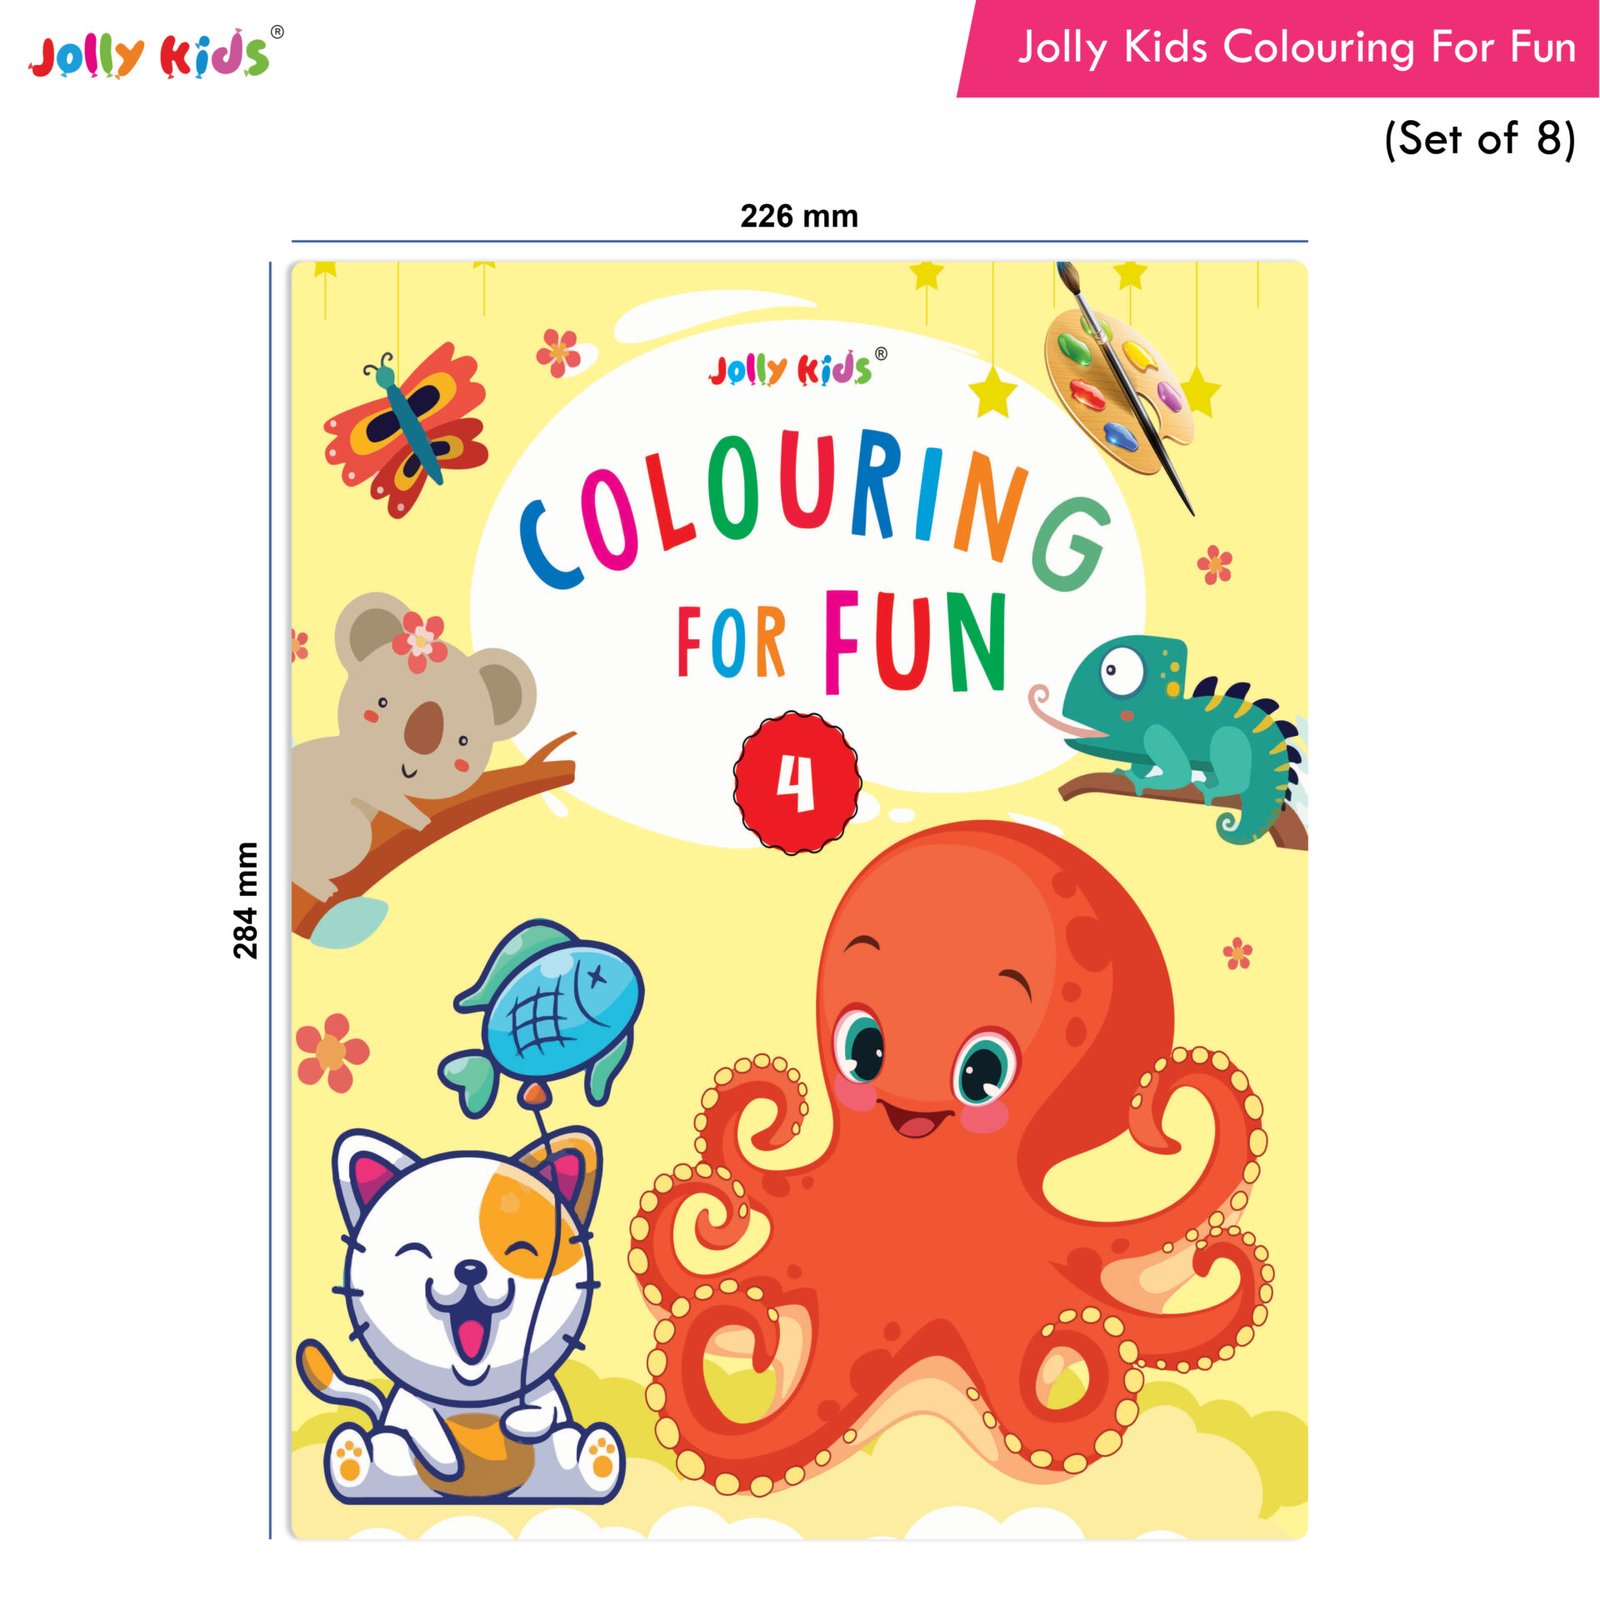 Jolly Kids Colouring For Fun Book Set of 8 2